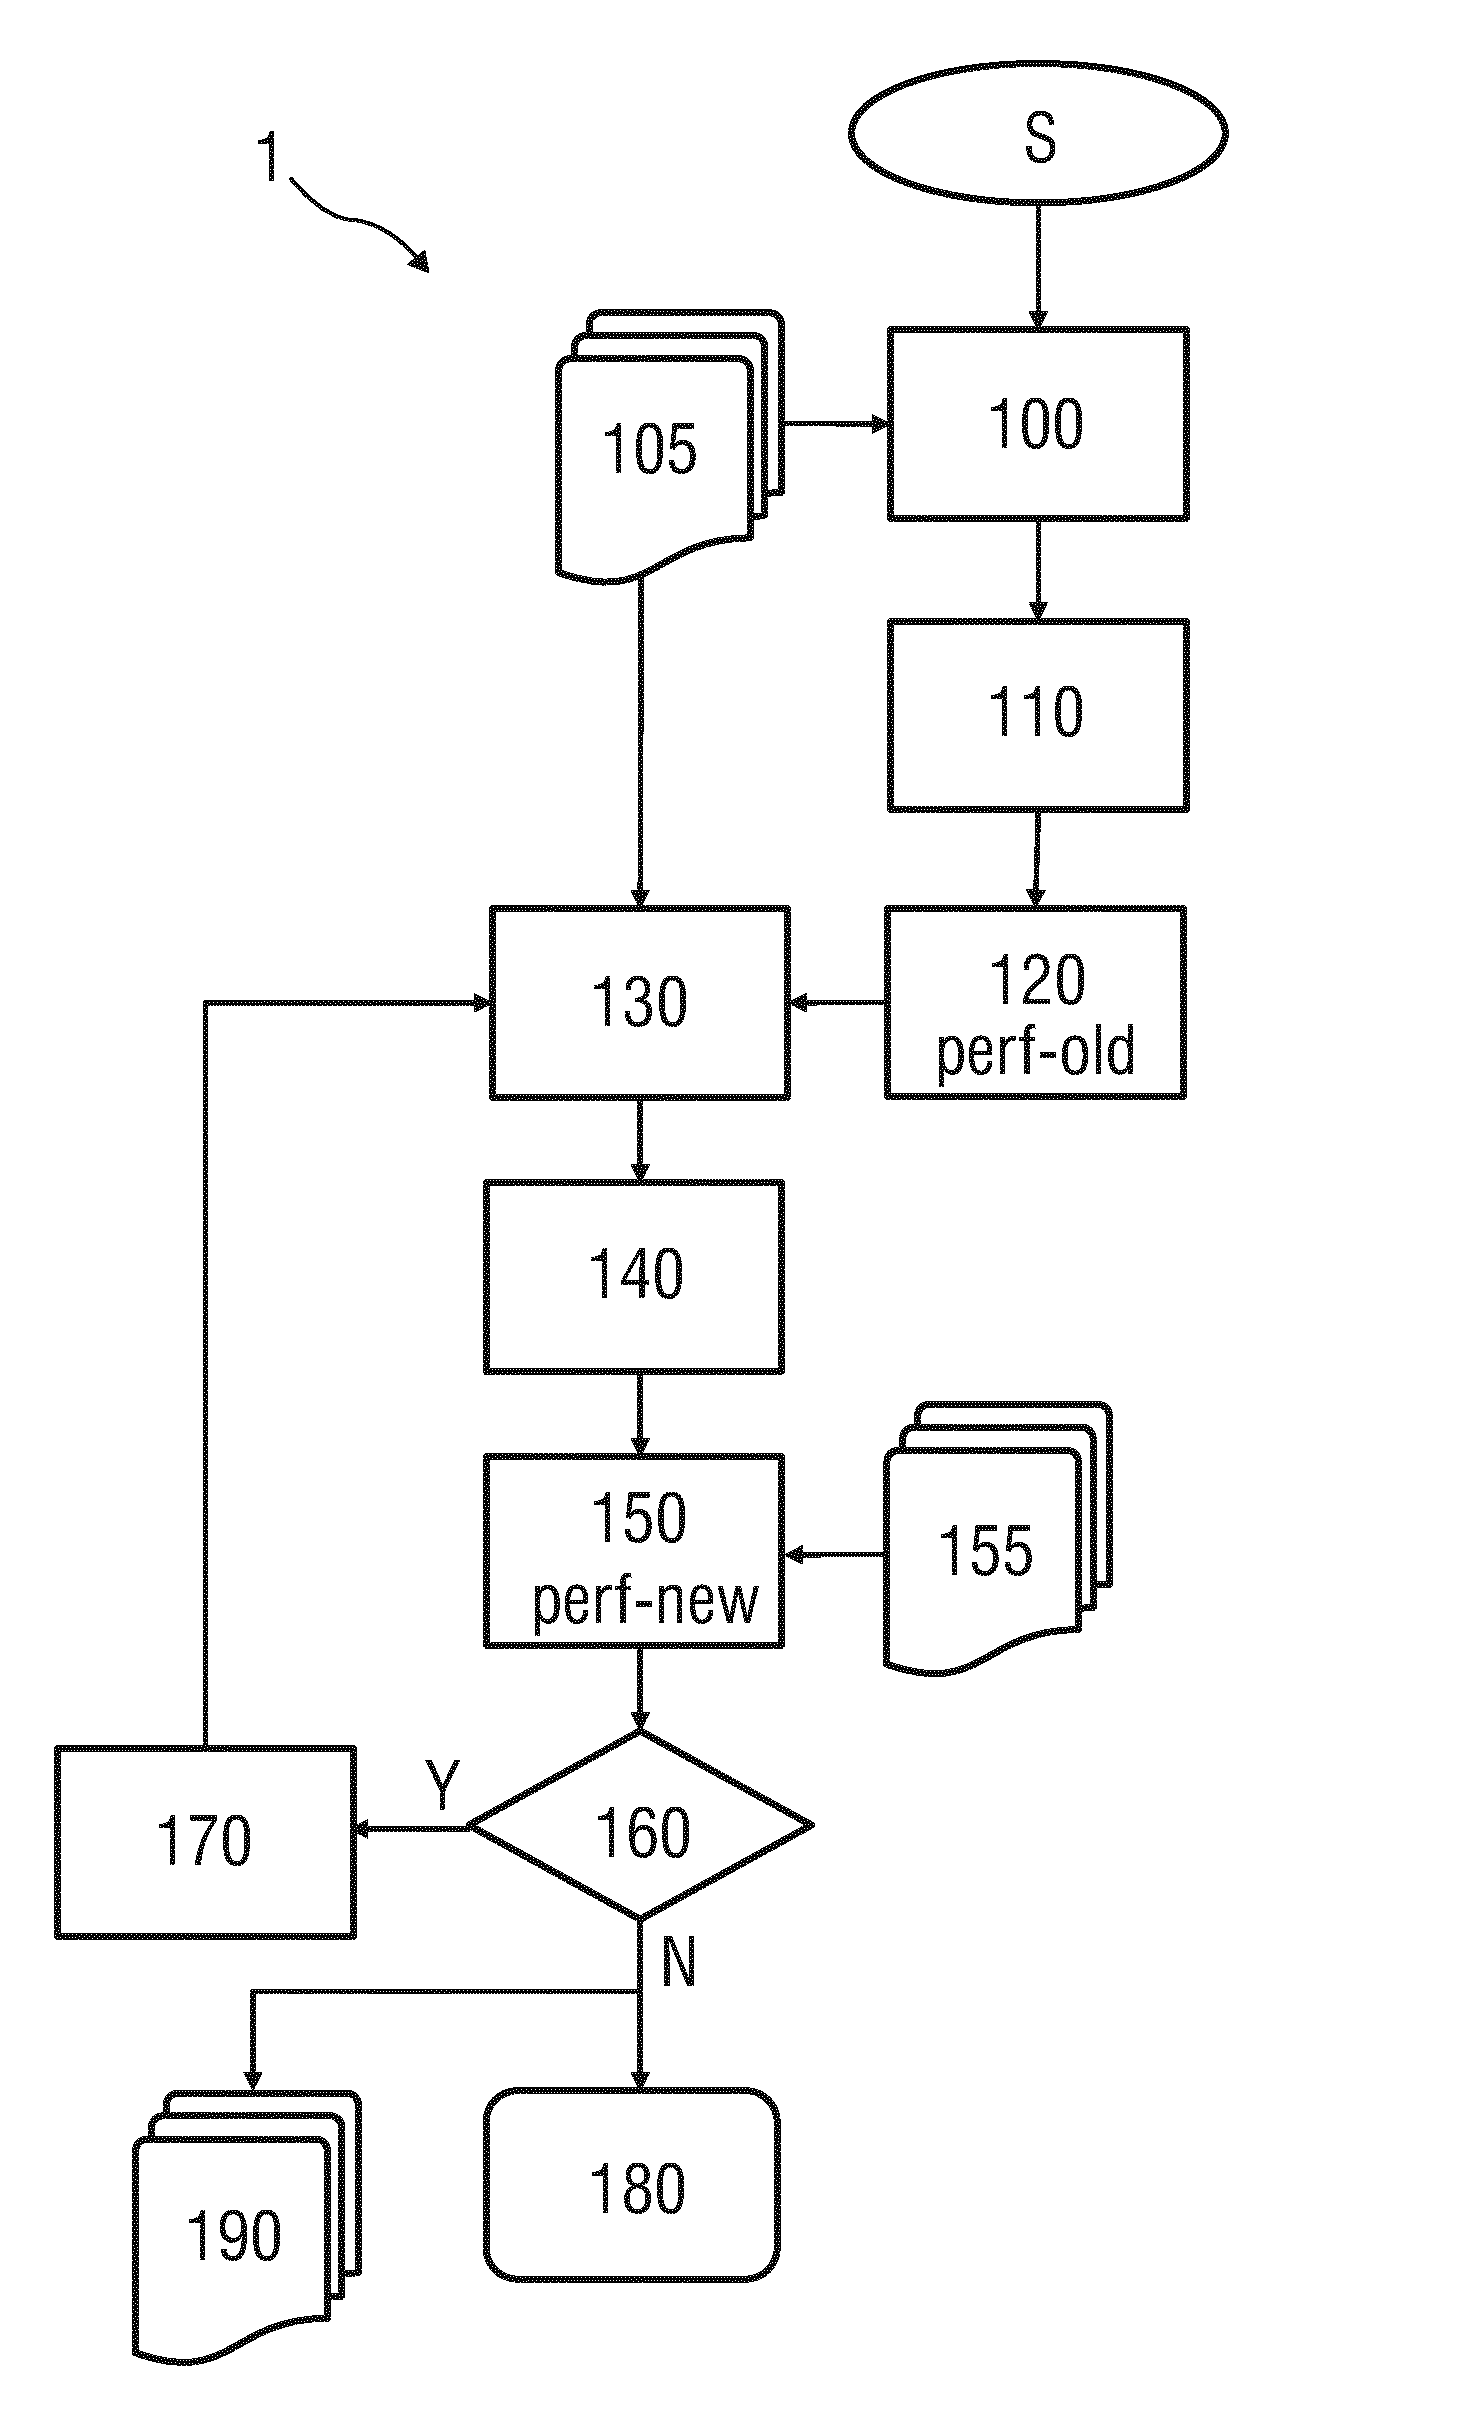 Method for binary classification of a query image